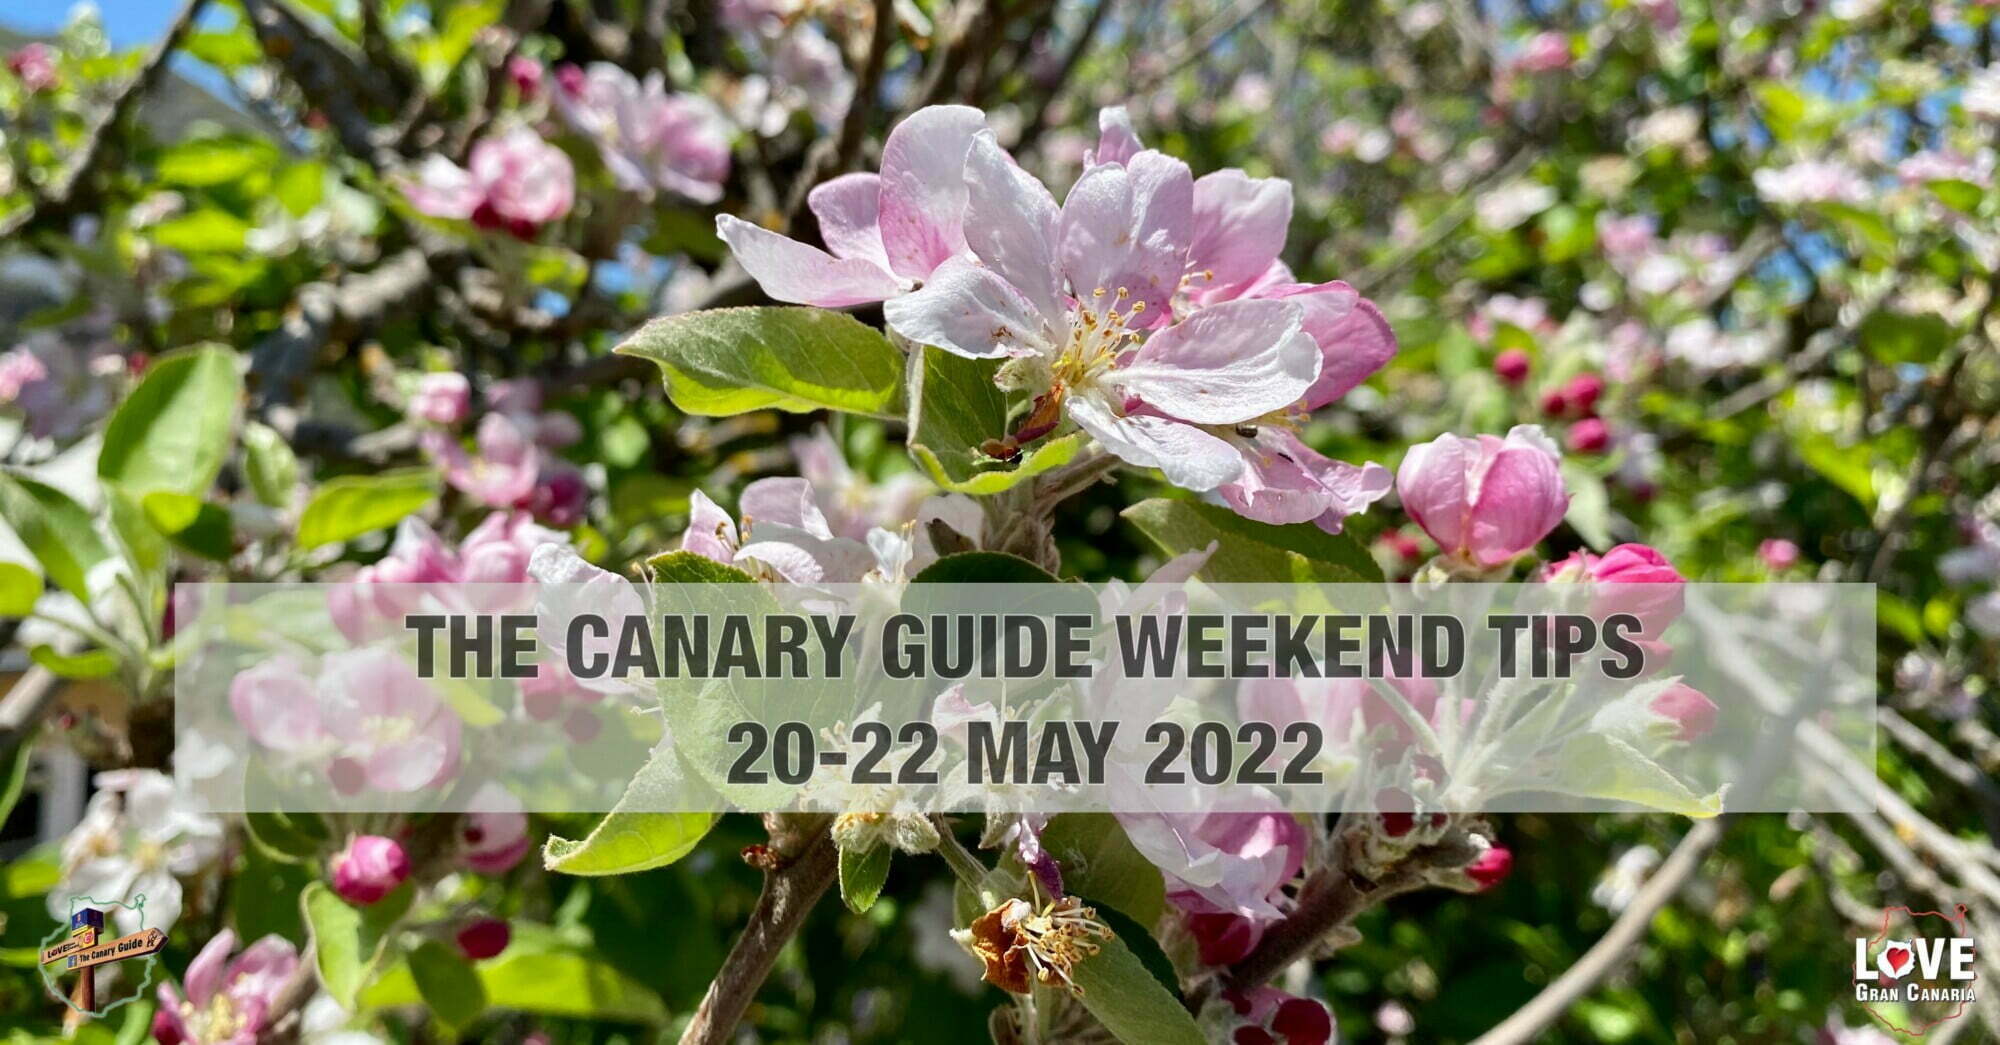 The Canary Guide #WeekendTips 20-22 May 2022